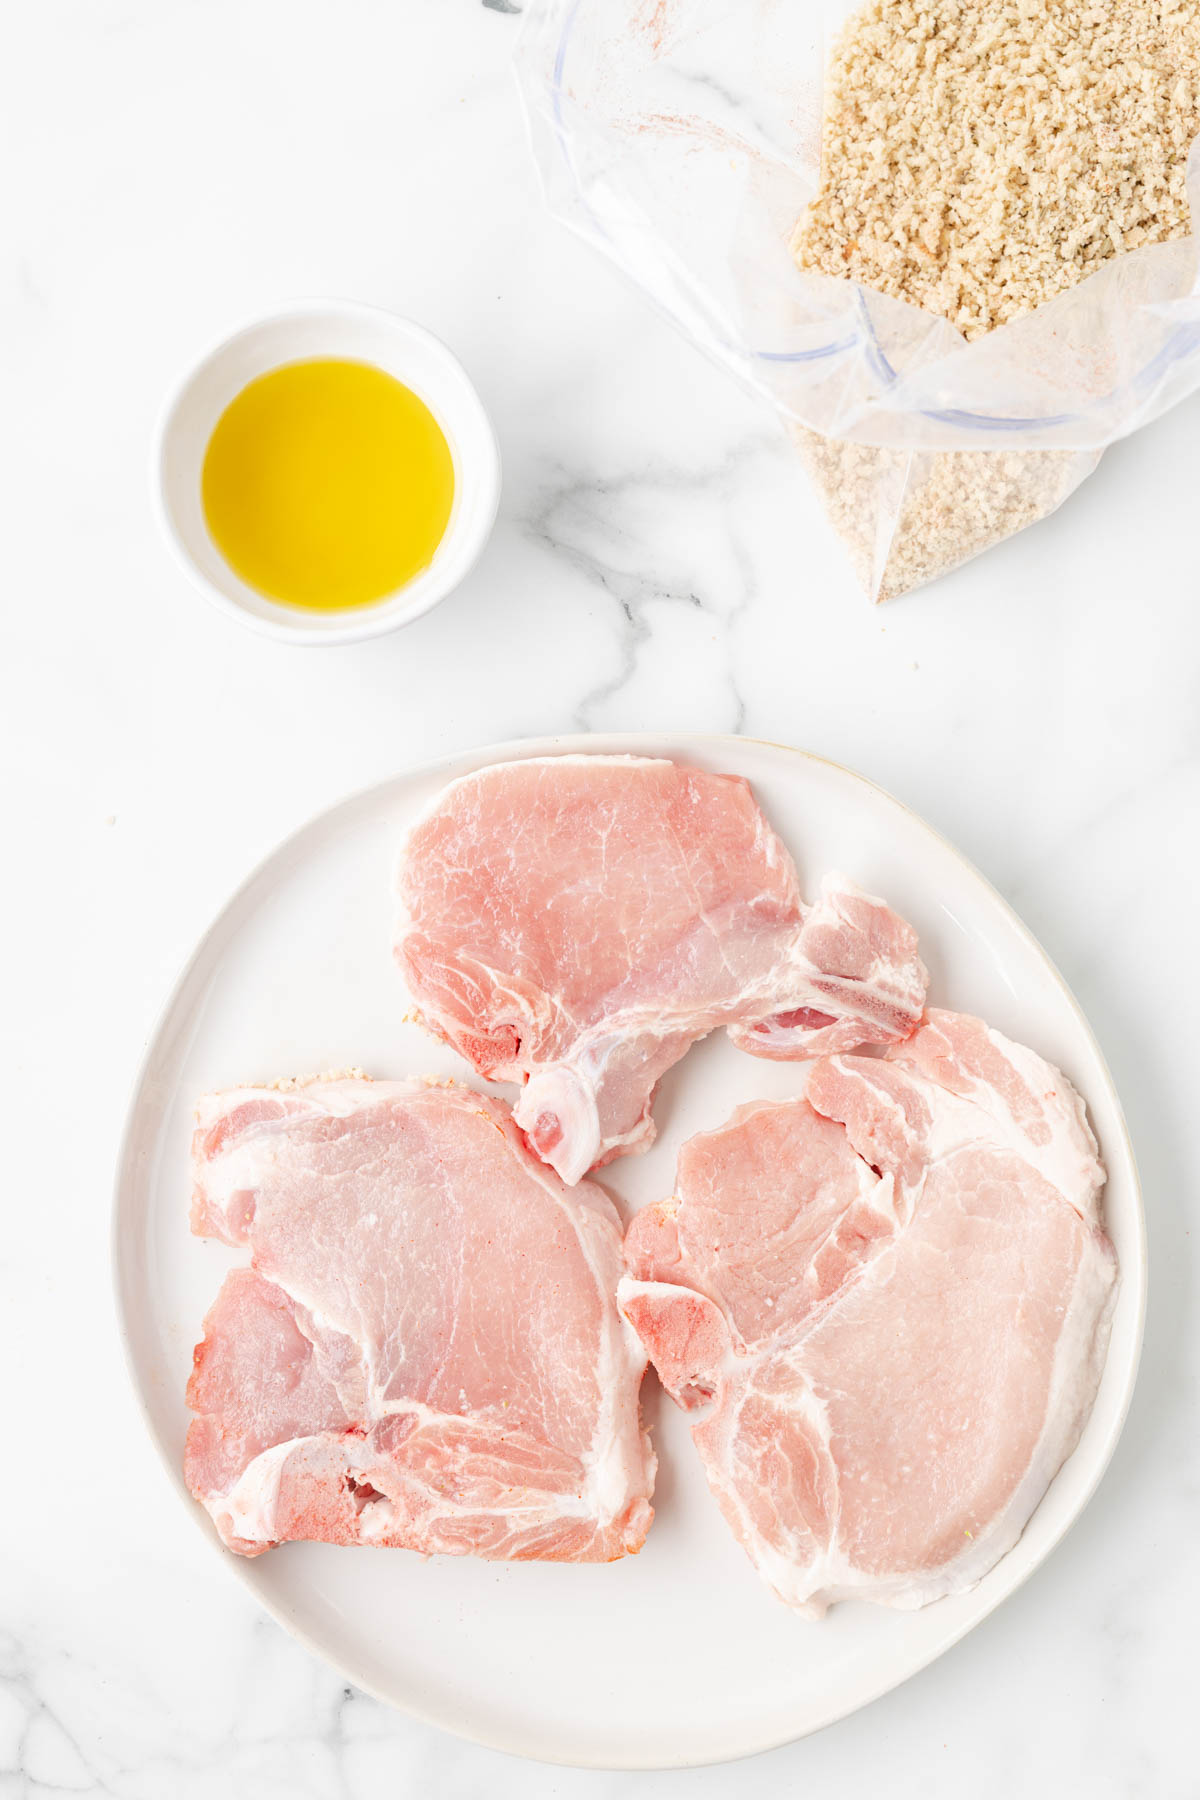 Pork chops are displayed on a white plate, with a small bowl of olive oil and a bag of bread crumbs and herbs in a zip top bag. 